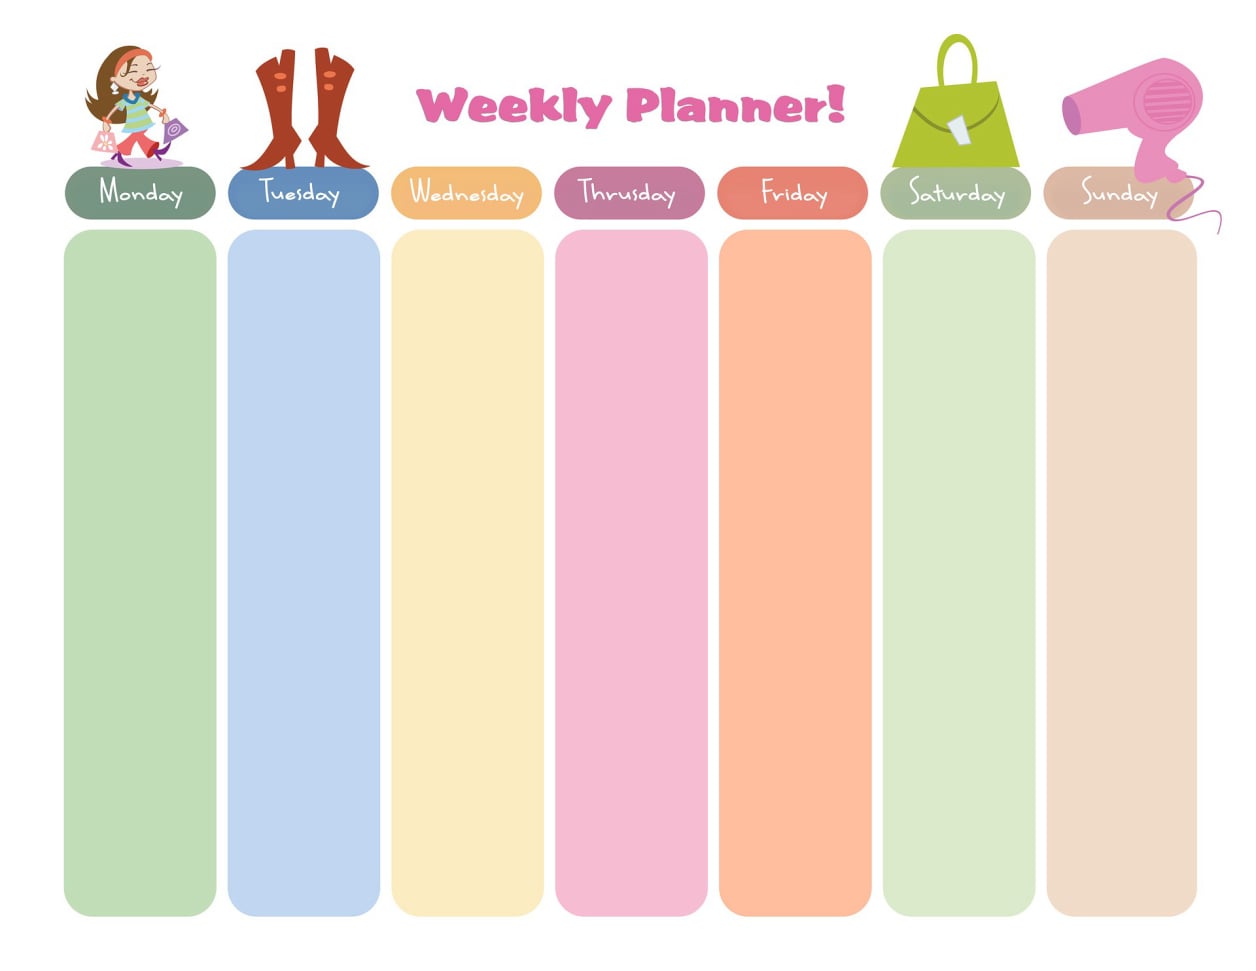 How to Customize PLR Planners for Your Brand